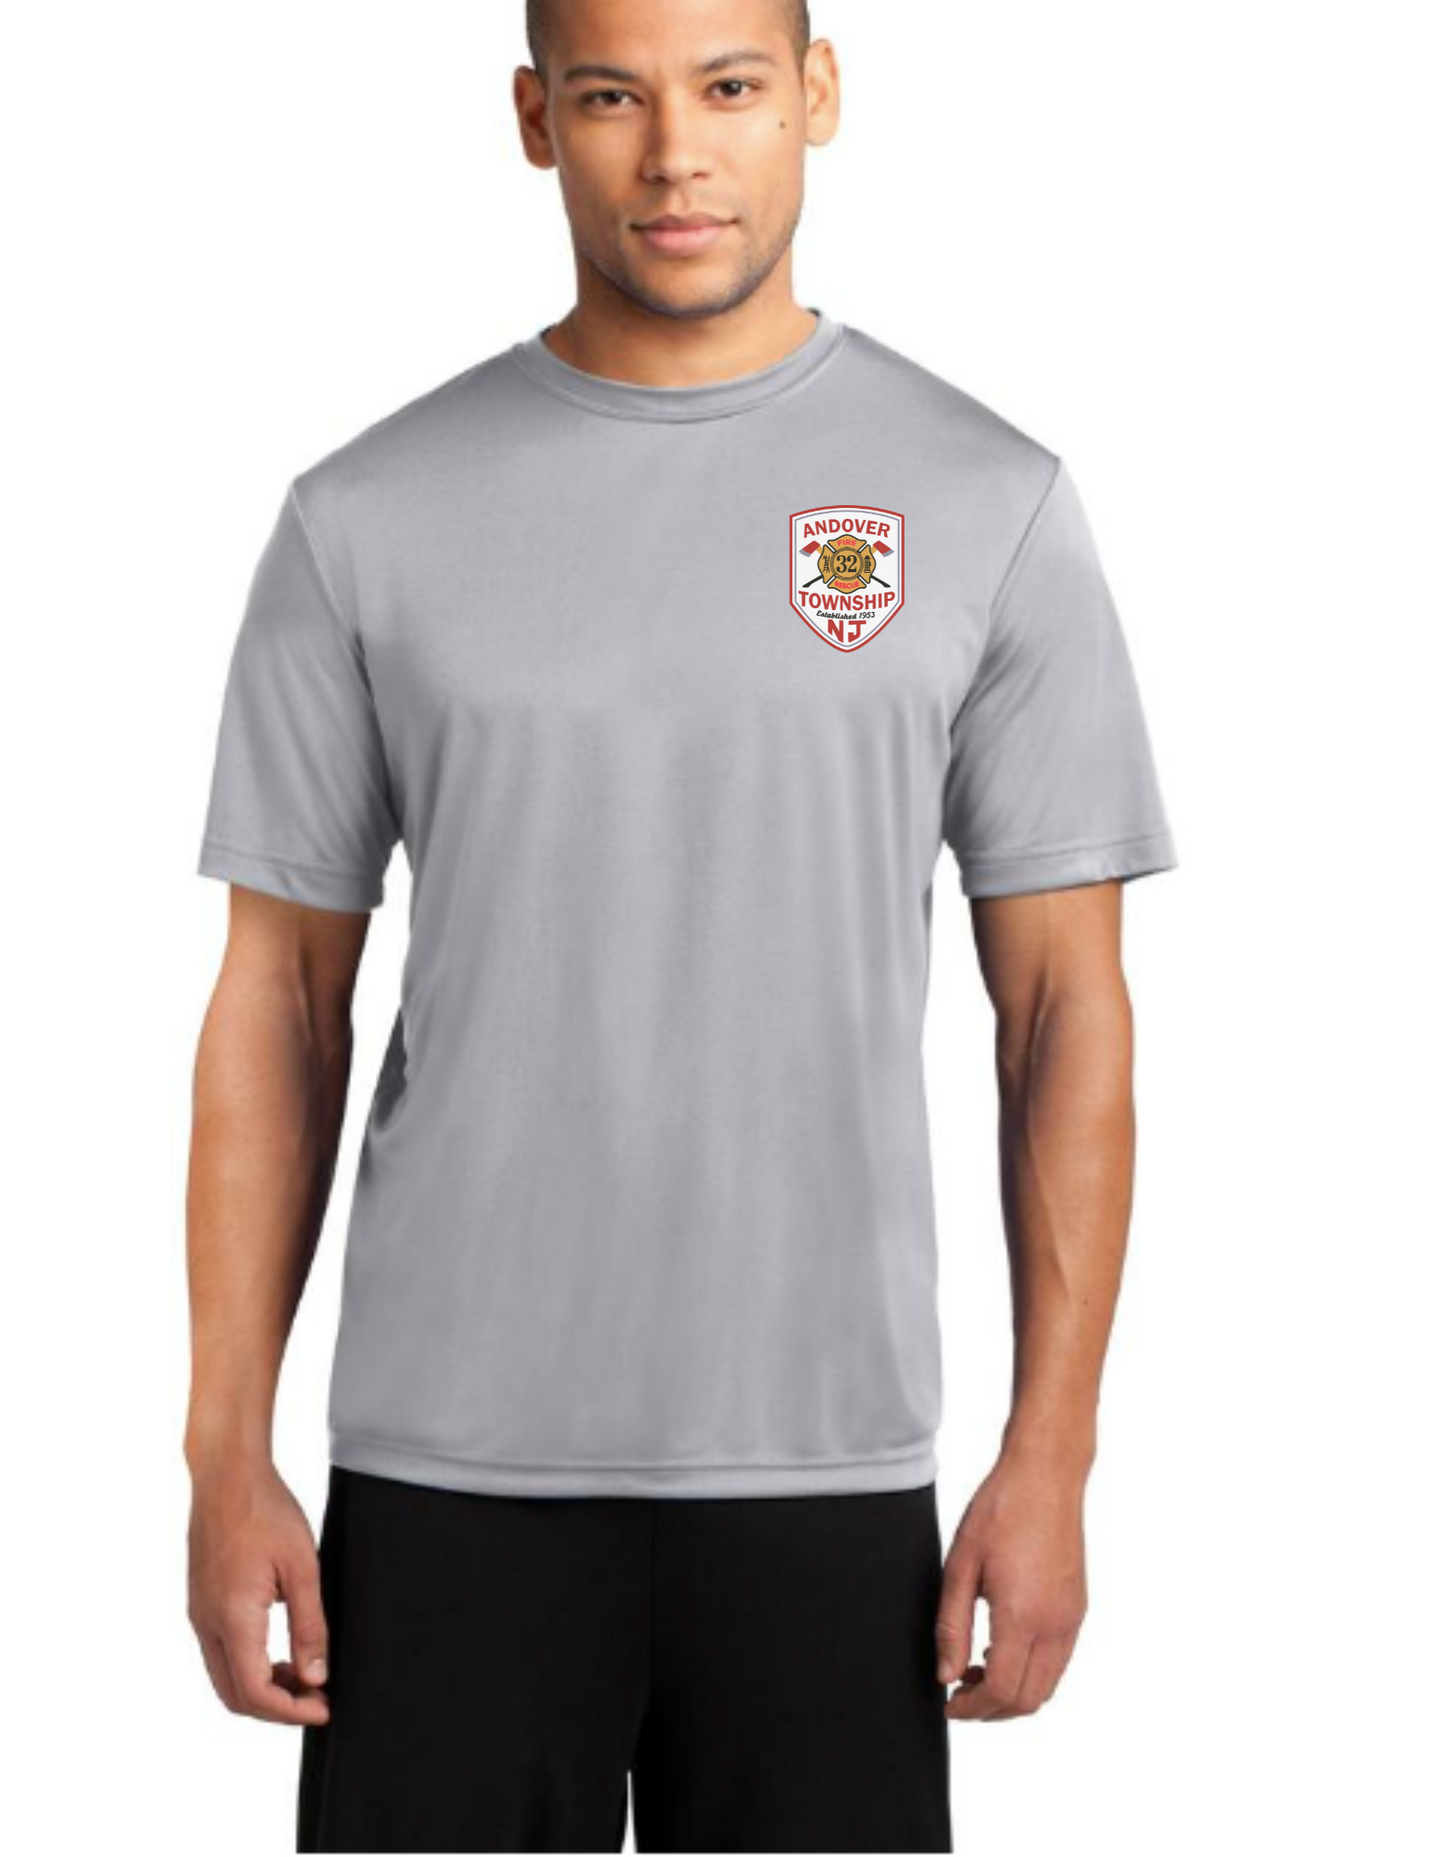 Andover Township Fire Performance Tee